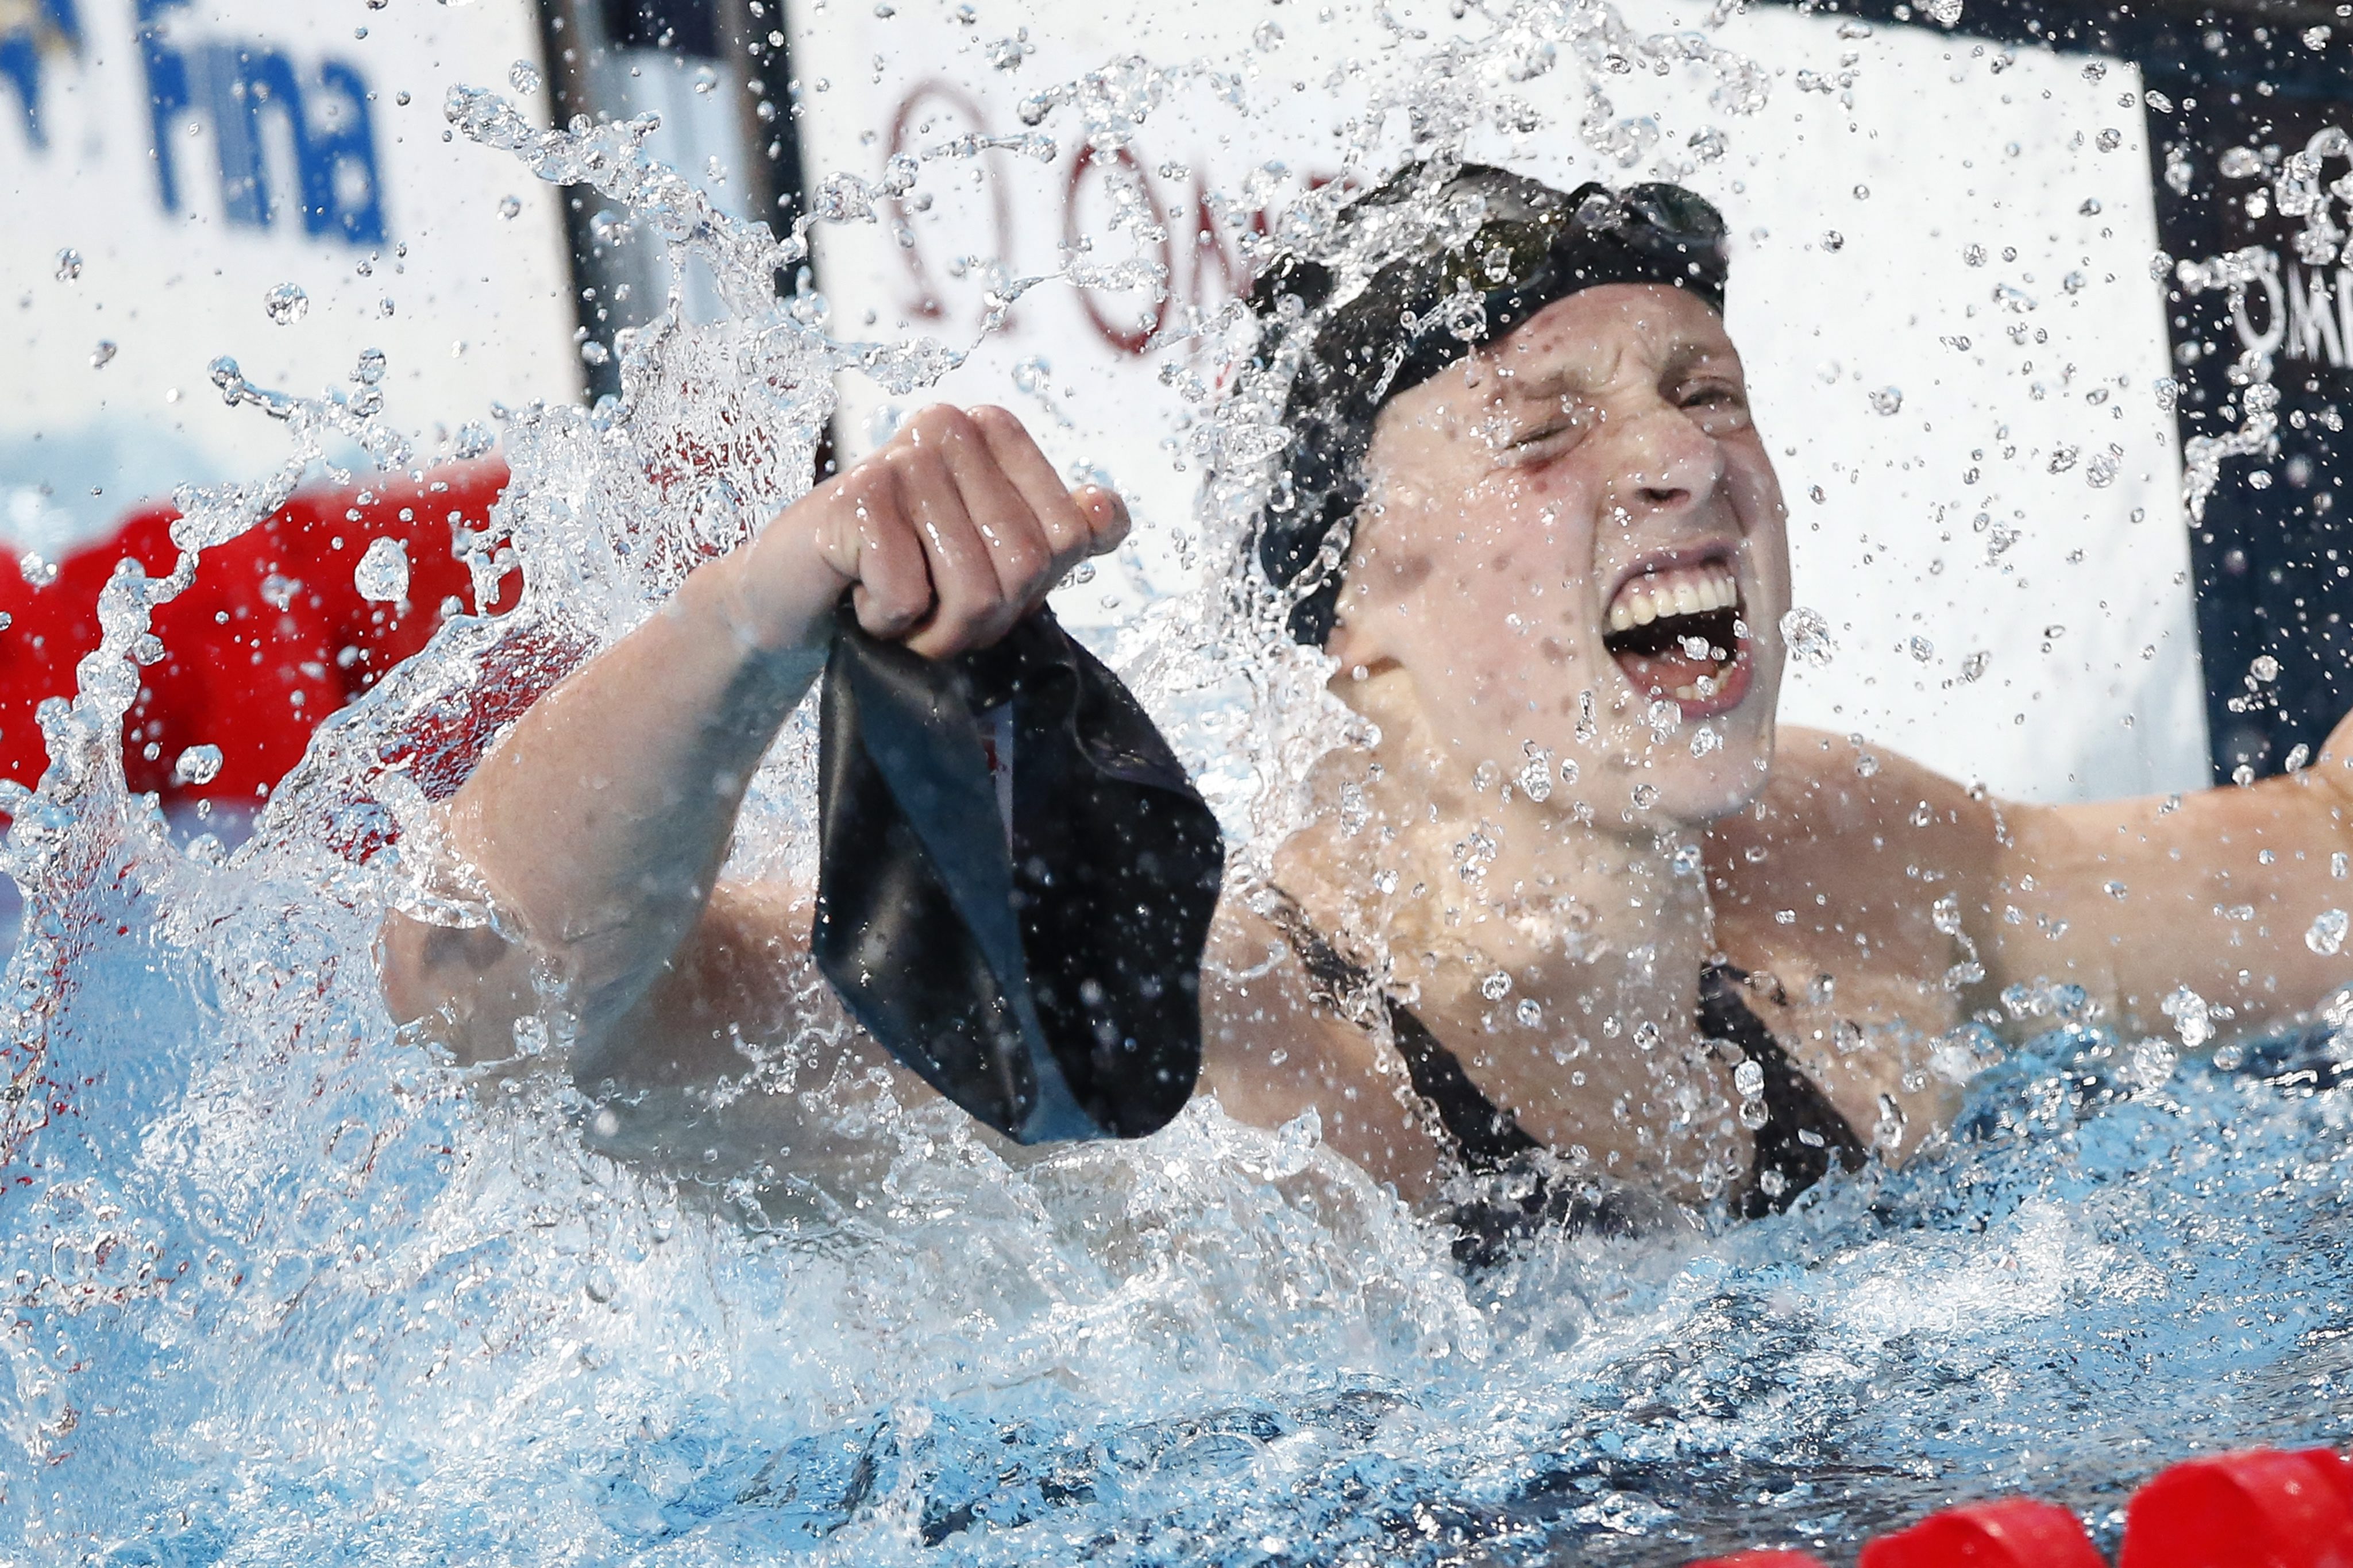 Katie Ledecky pulls off one of her swim caps after winning her fifth gold and clocking a world record in the women's 800m freestyle final. Photo: EPA